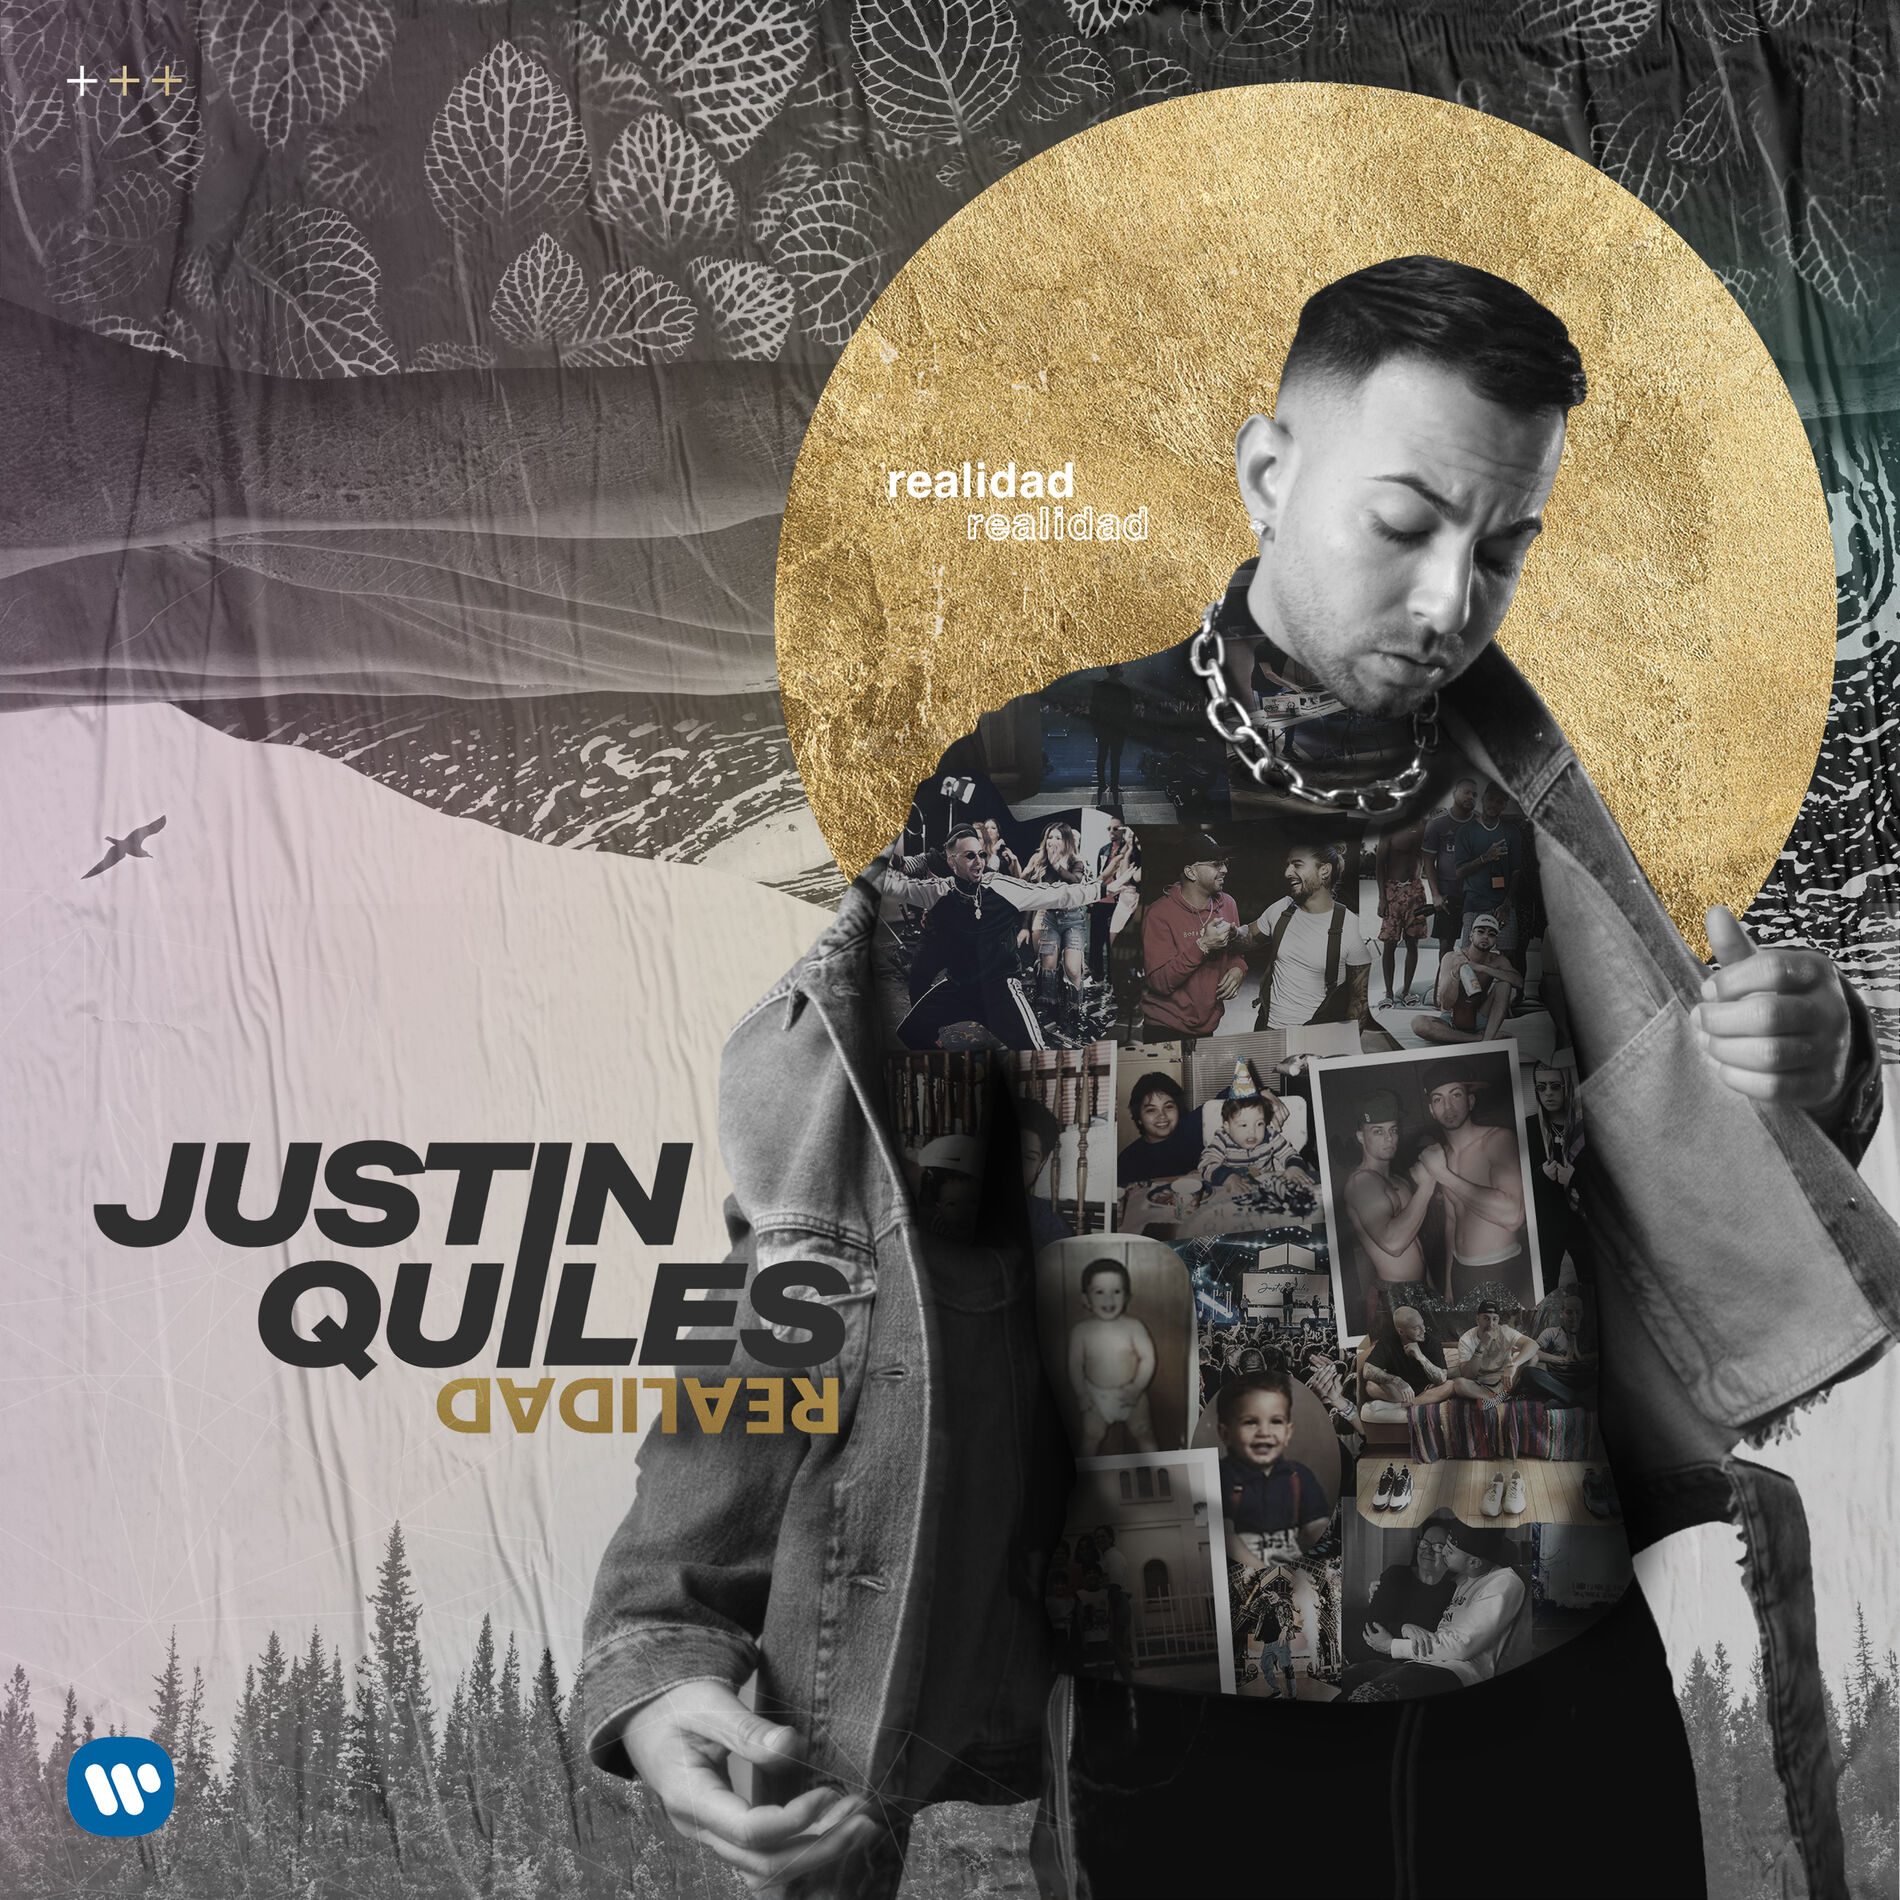 Justin Quiles: albums, songs, playlists | Listen on Deezer